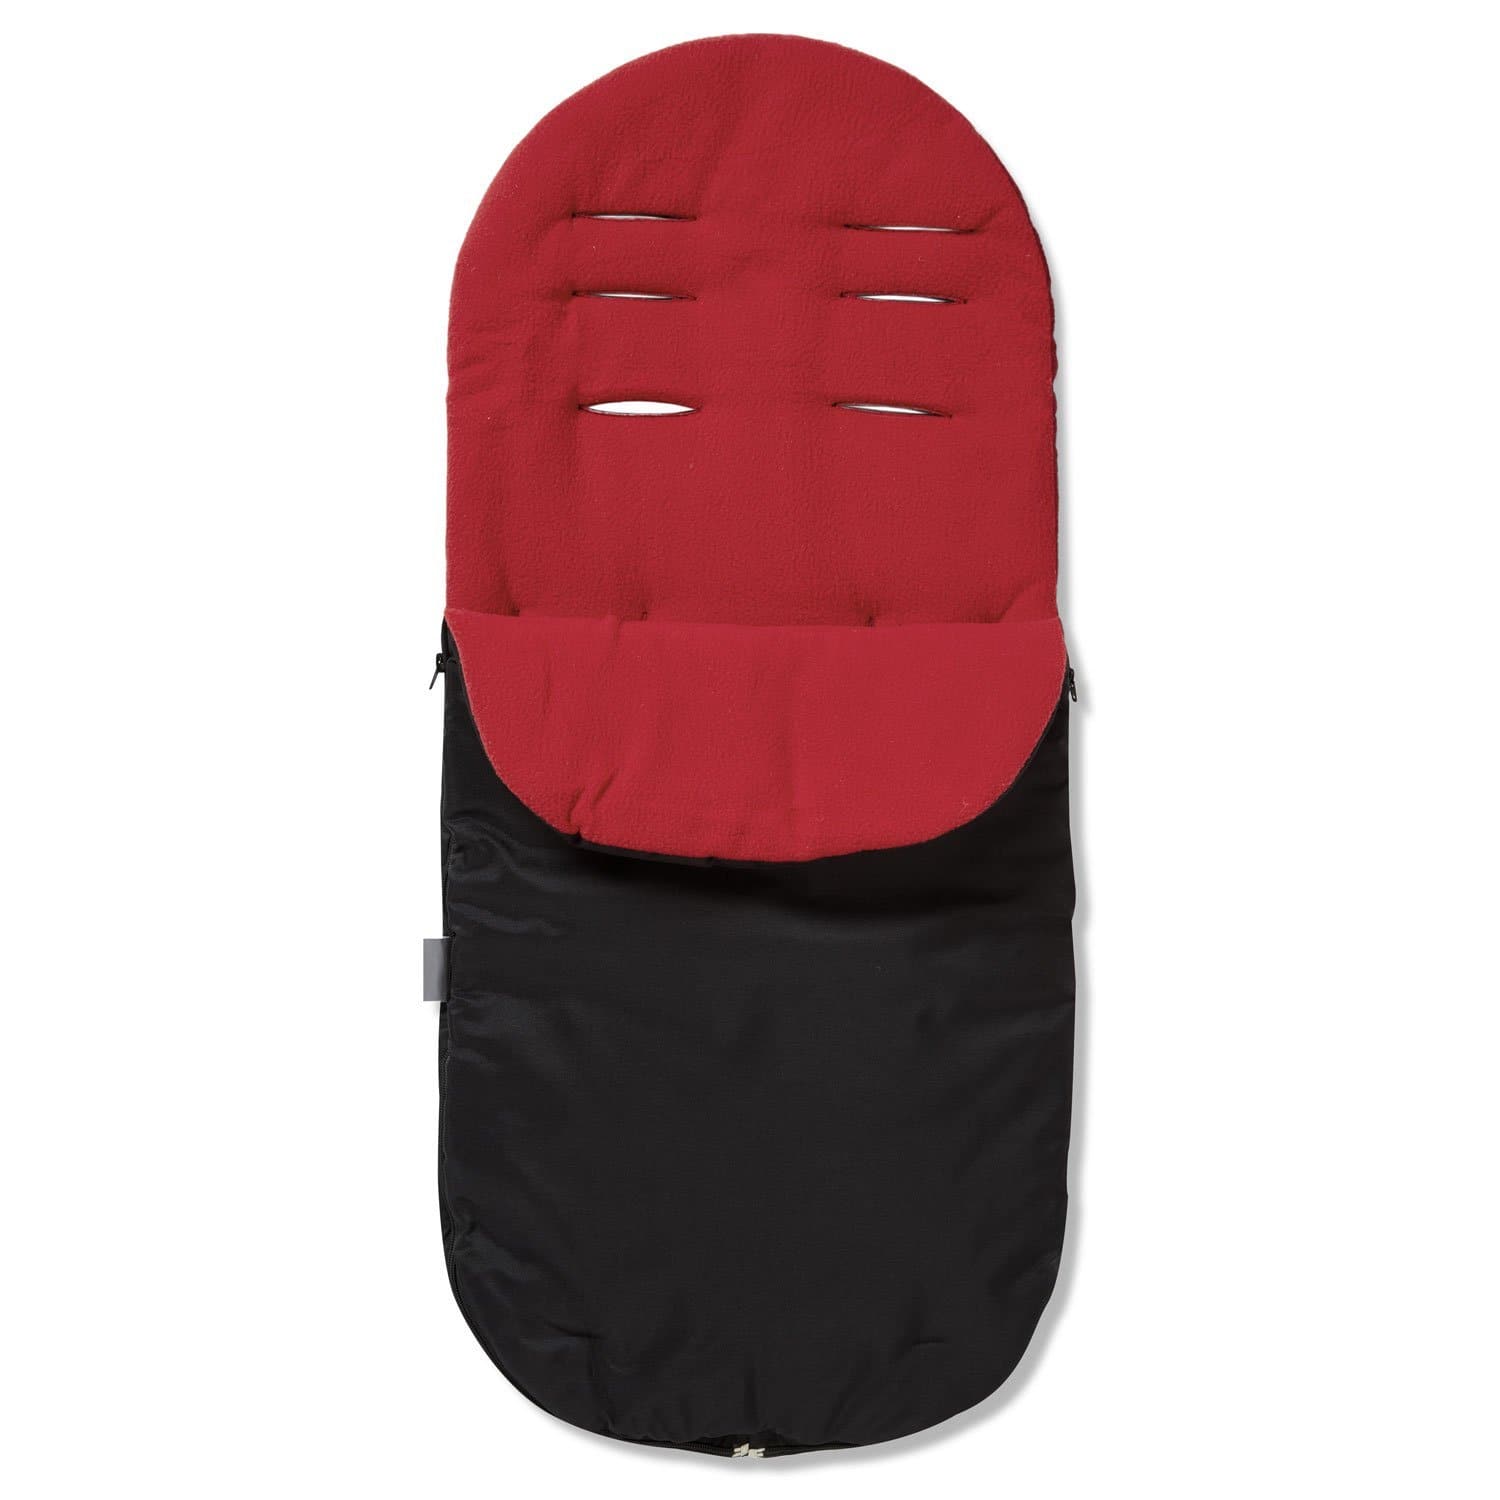 Footmuff / Cosy Toes Compatible with Kiddicare.com - Red / Fits All Models | For Your Little One